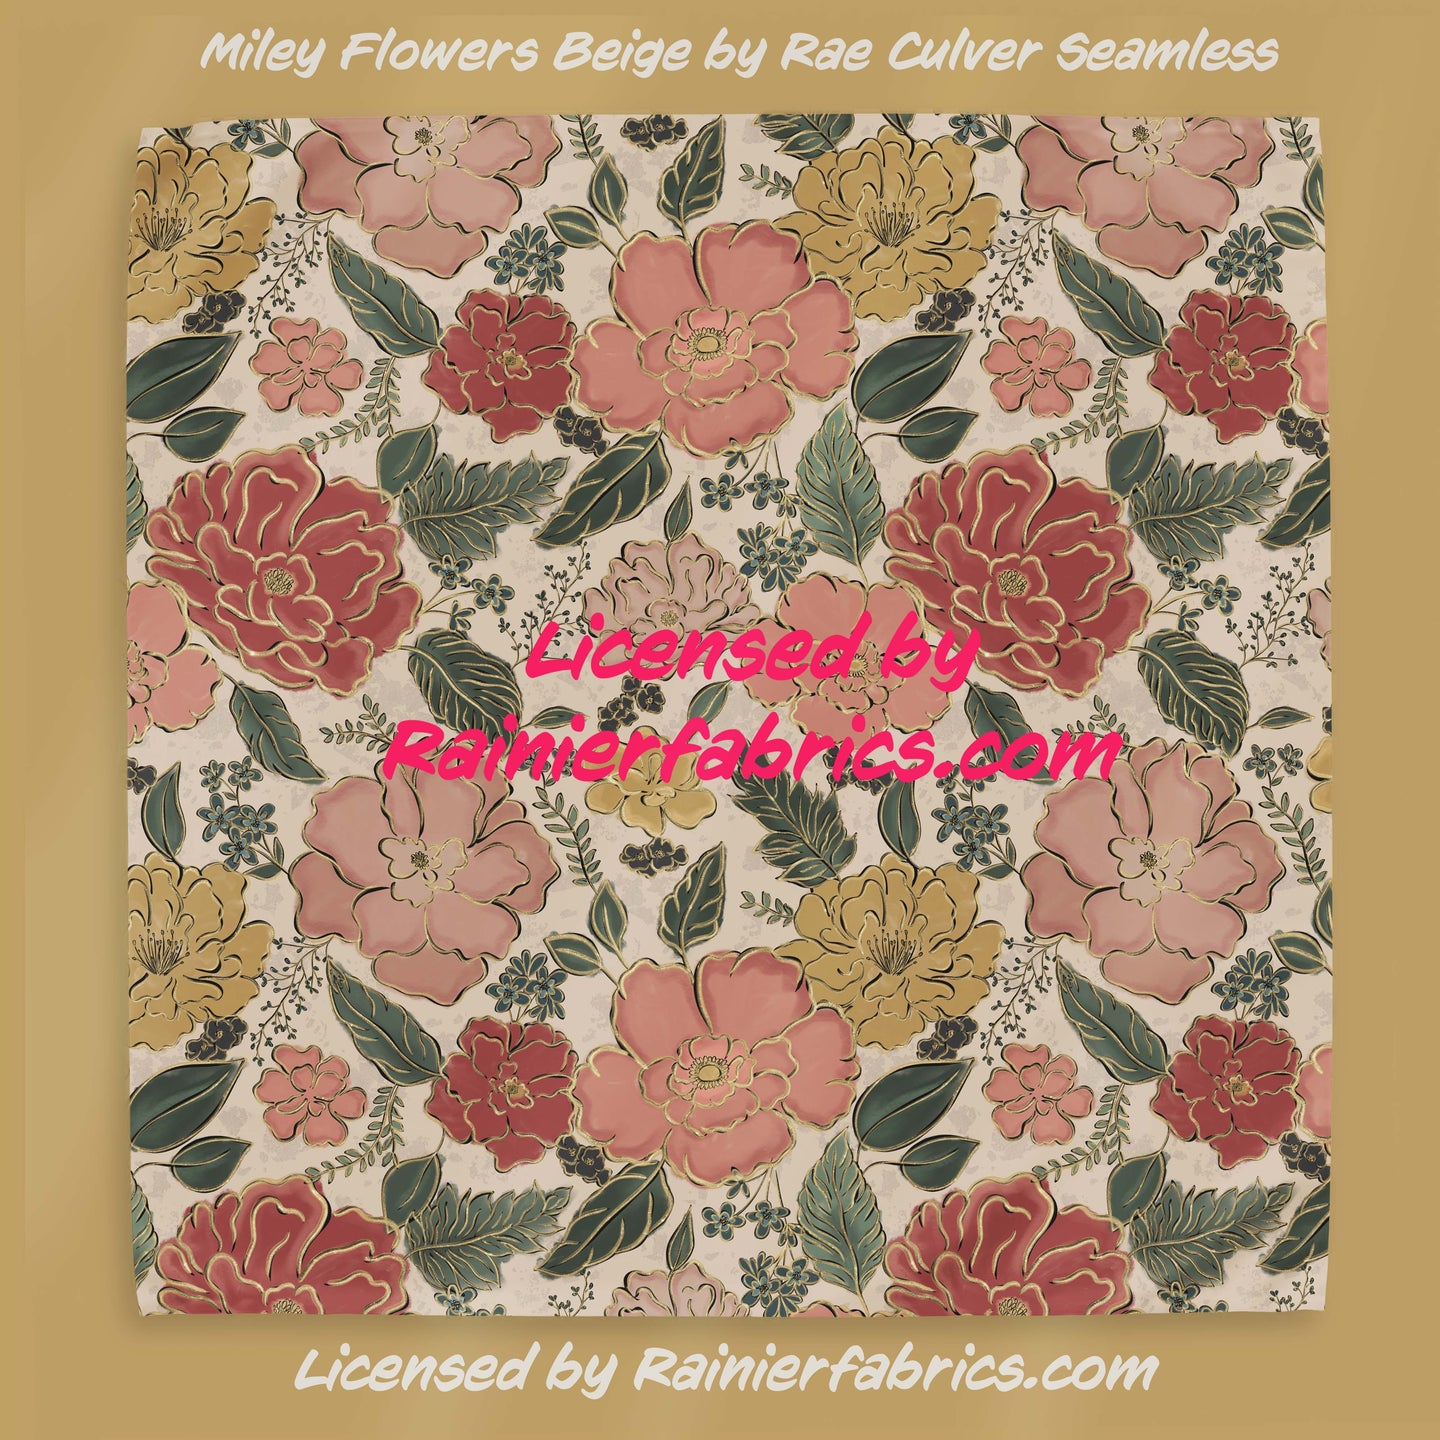 Miley Flowers with Options by Rae Culver Seamless - 2-5 business days to ship - Order by 1/2 yard